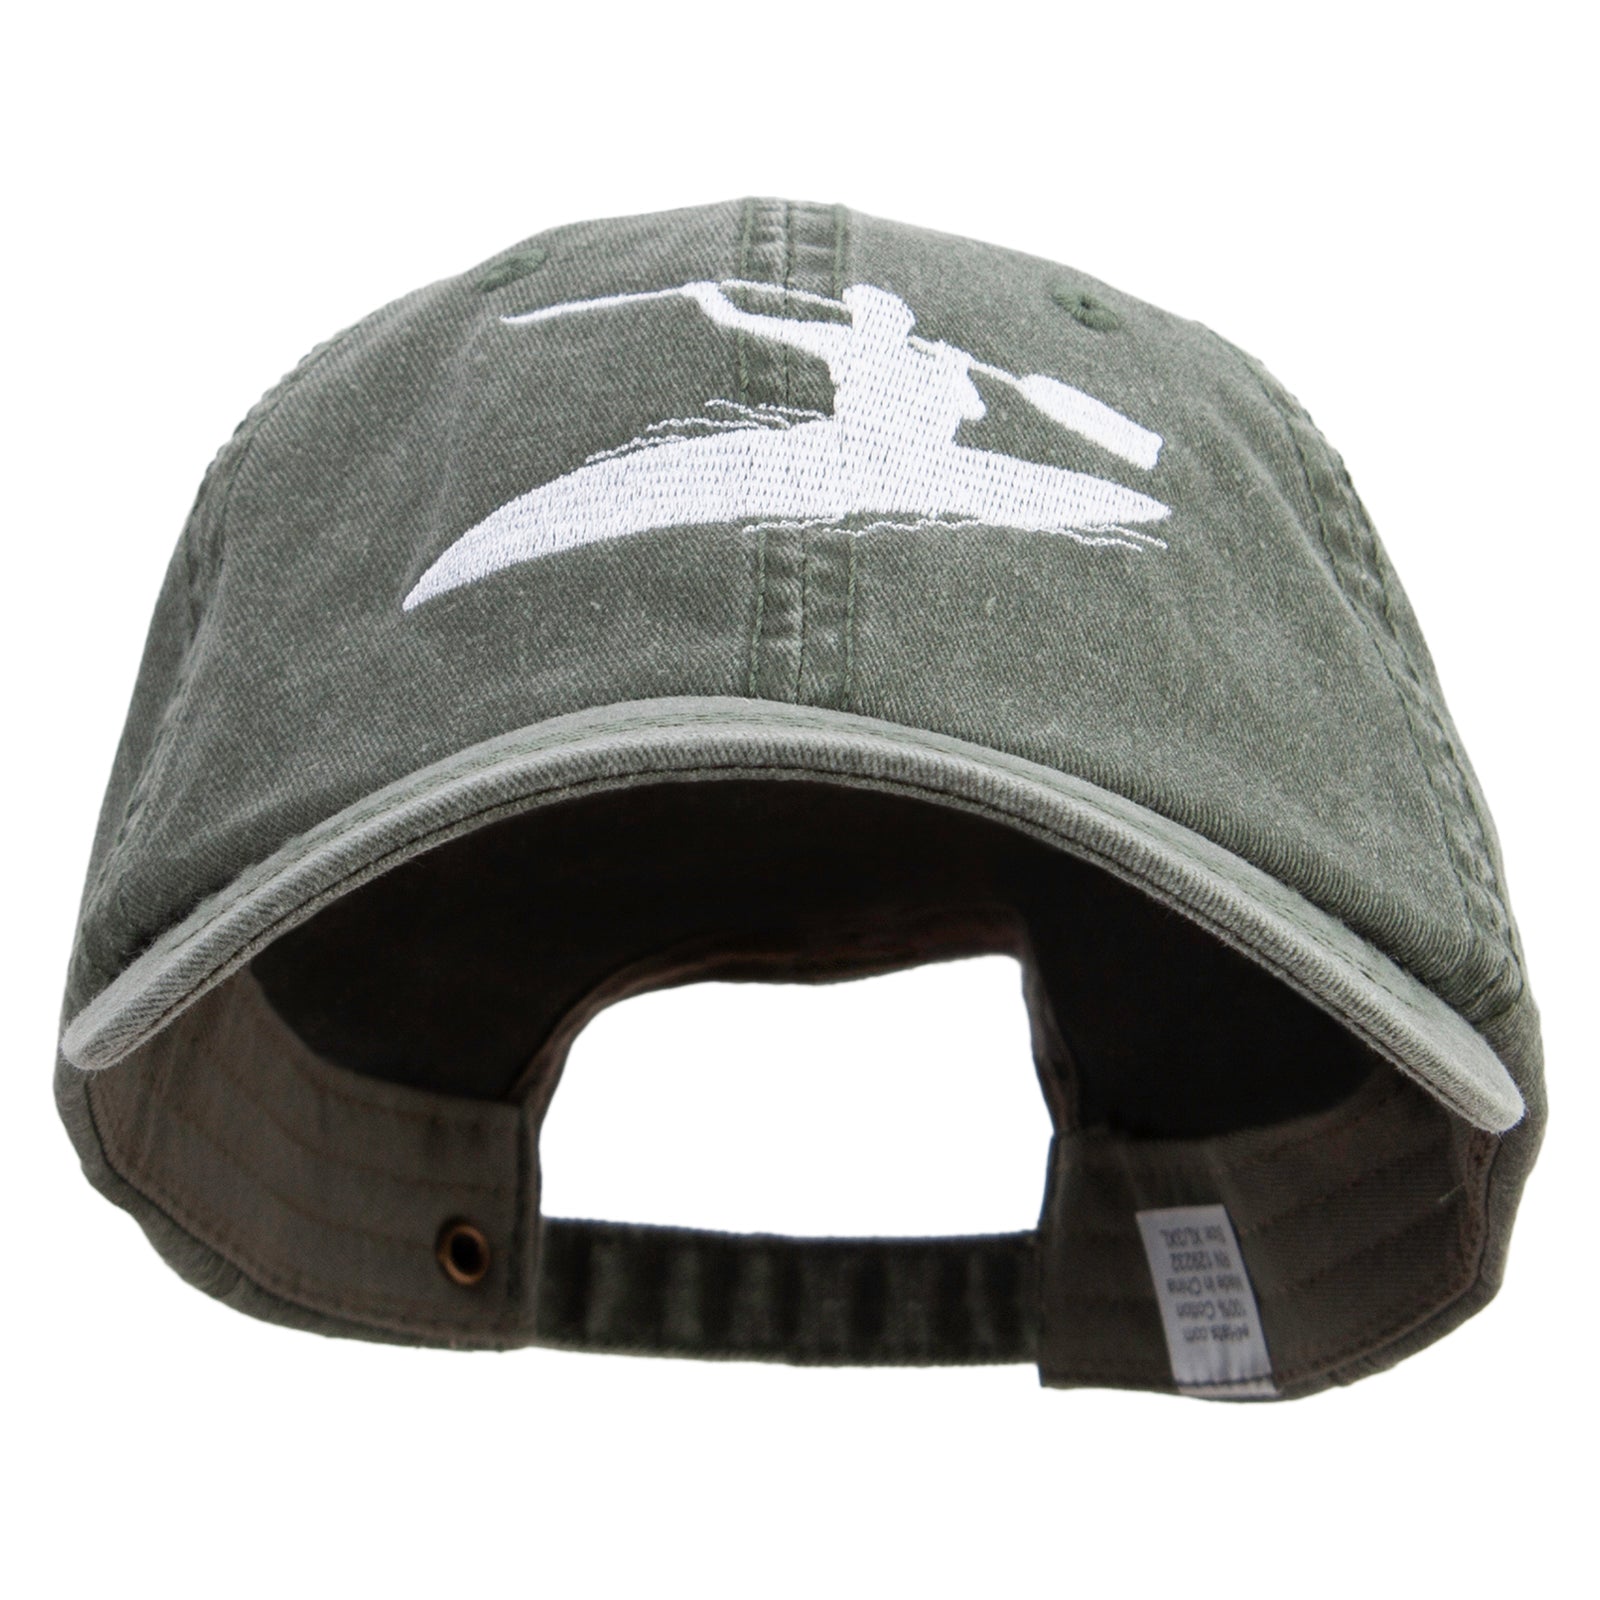 Sports Kayak Embroidered Big Size Washed Pigment Dyed Cap, Olive / XL-3XL